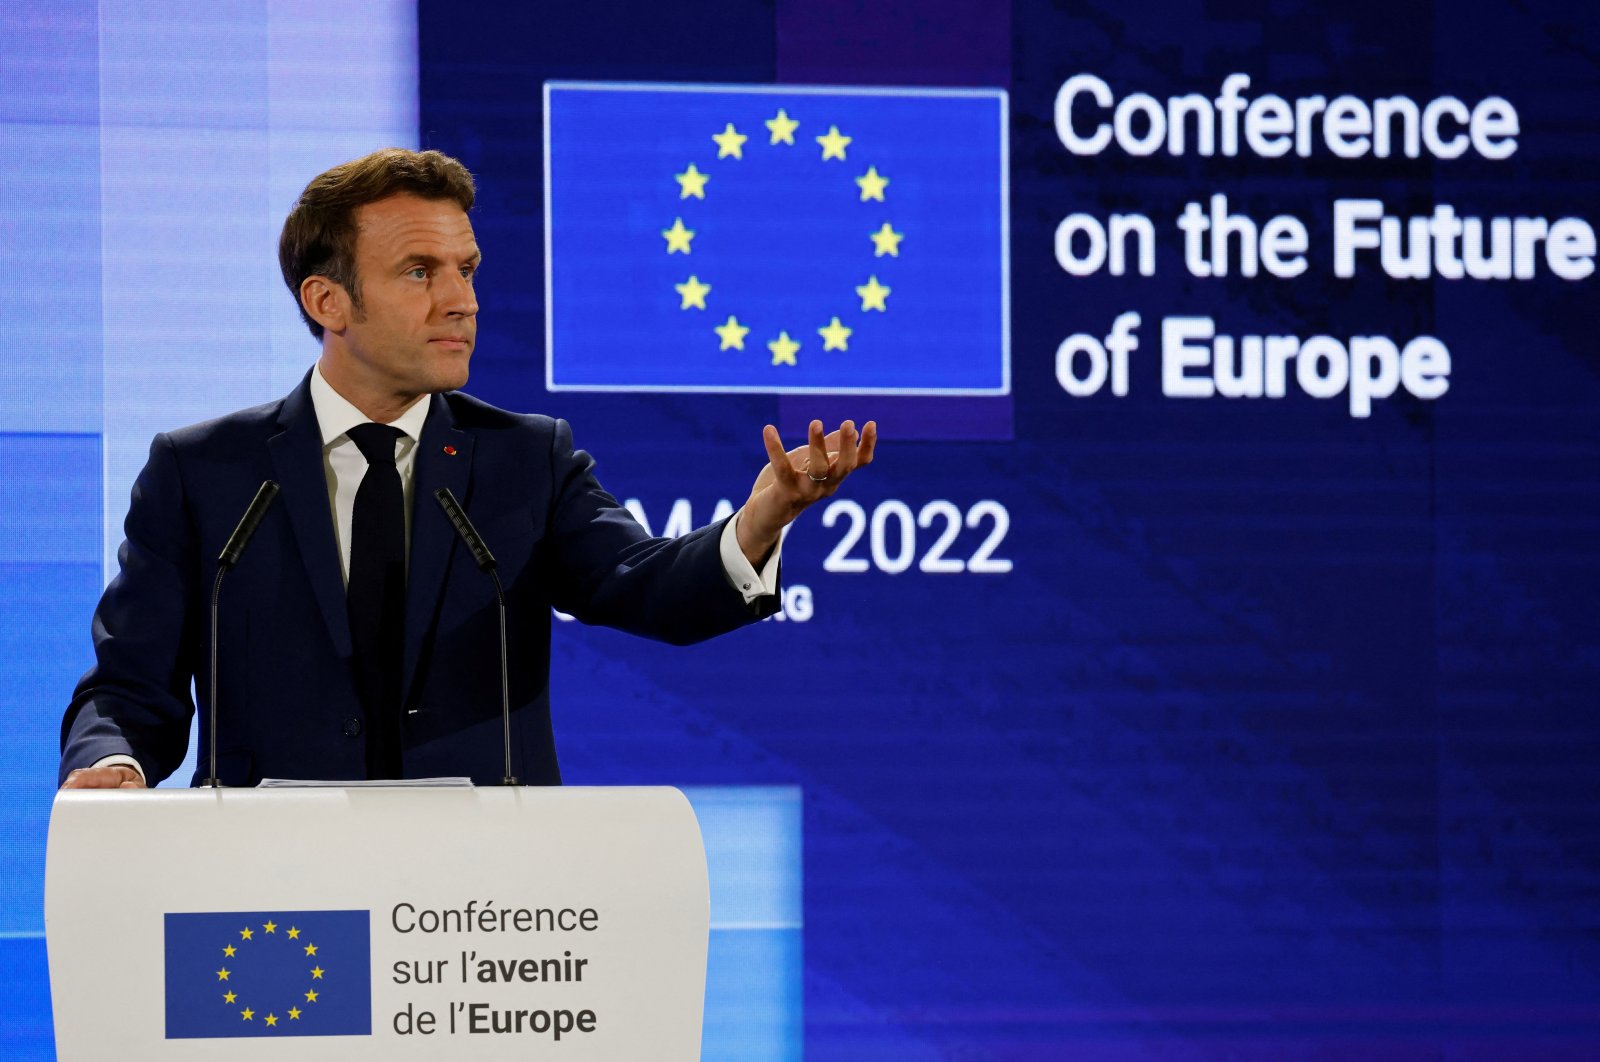 France&#039;s President Emmanuel Macron delivers a speech during the Conference on the Future of Europe and the release of its report with proposals for reform, in Strasbourg, France, May 9, 2022. (Reuters Photo)